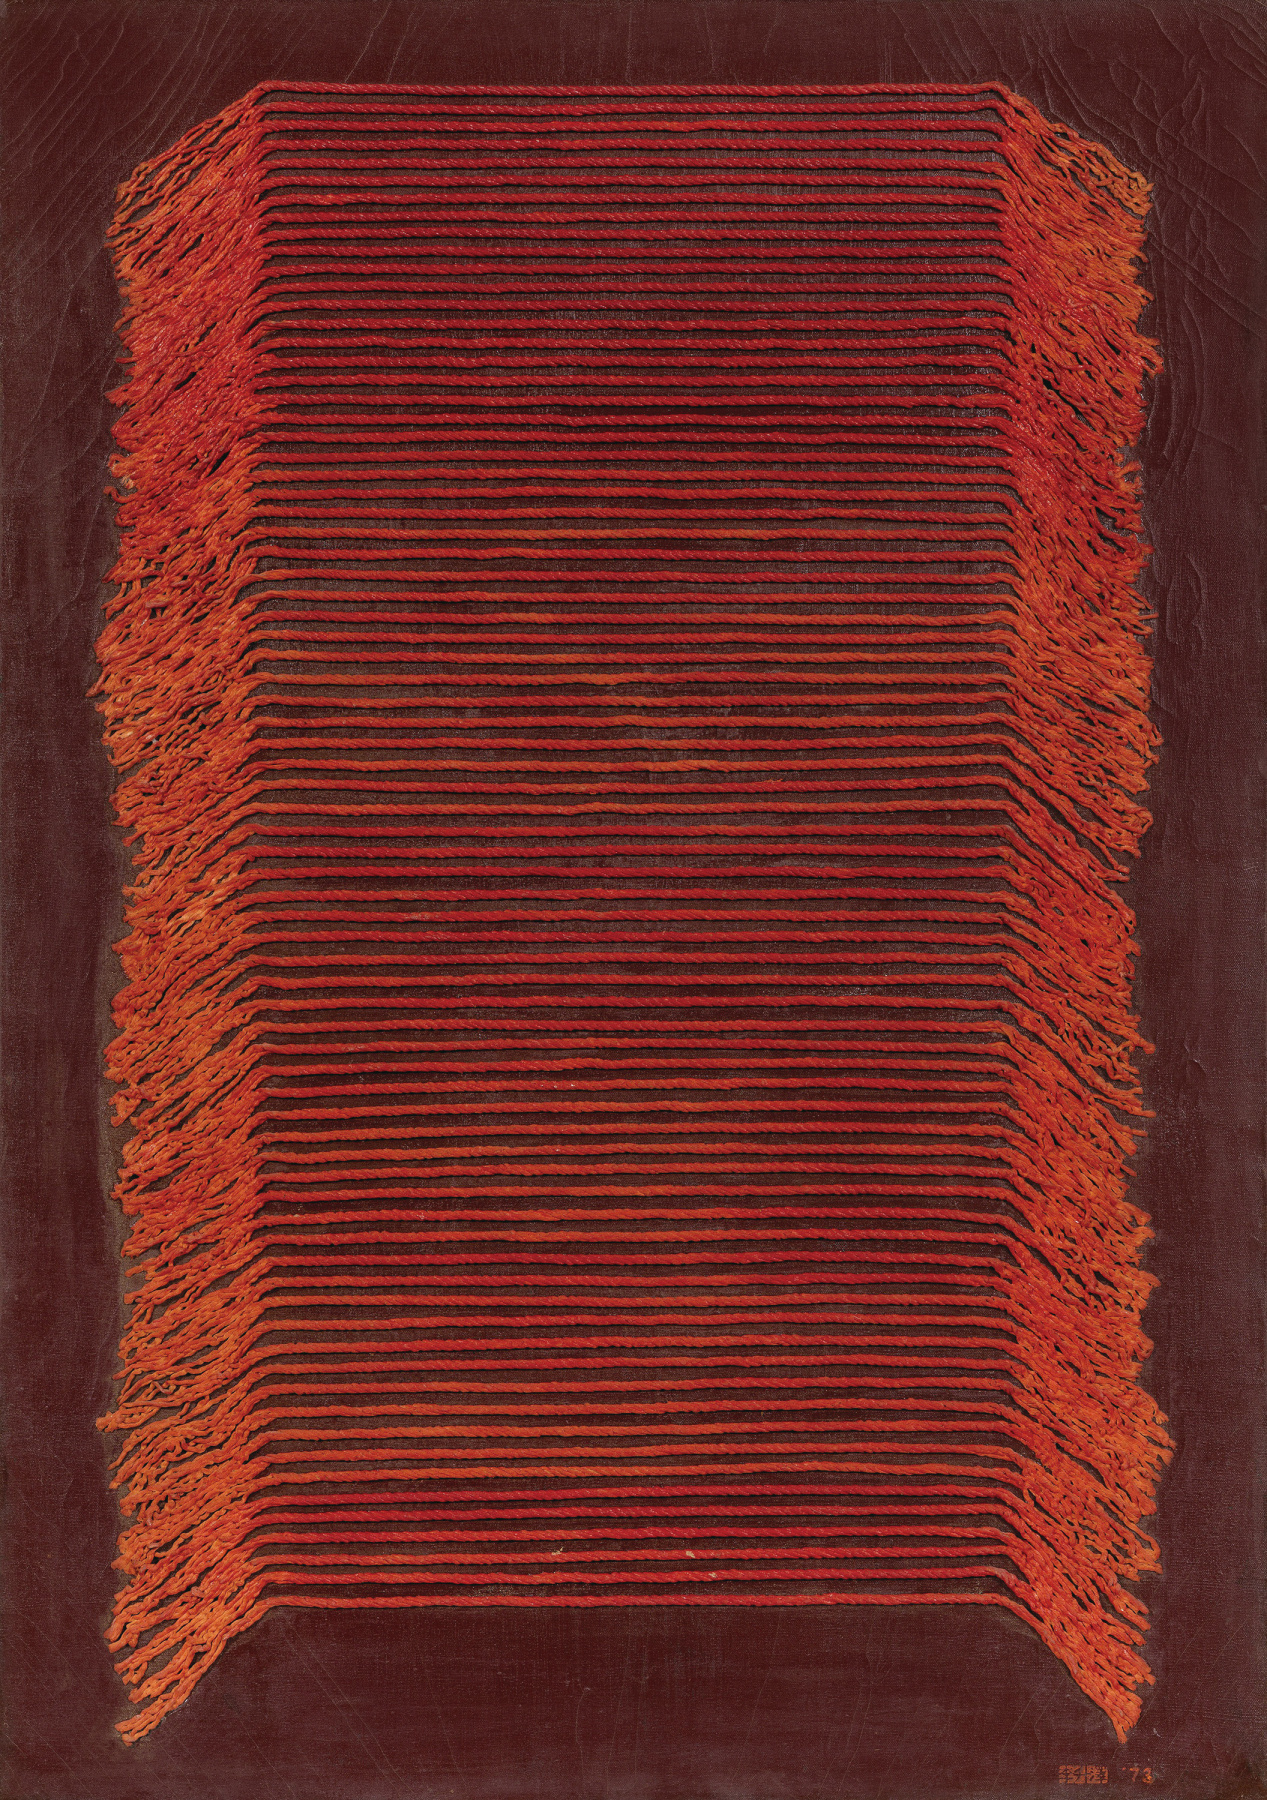 Seung-taek Lee

&amp;ldquo;Untitled&amp;rdquo;, 1972-1973

Rope on colored canvas

45 x 31 3/4 inches

114 x 80.5 cm

LEE 10

$240,000